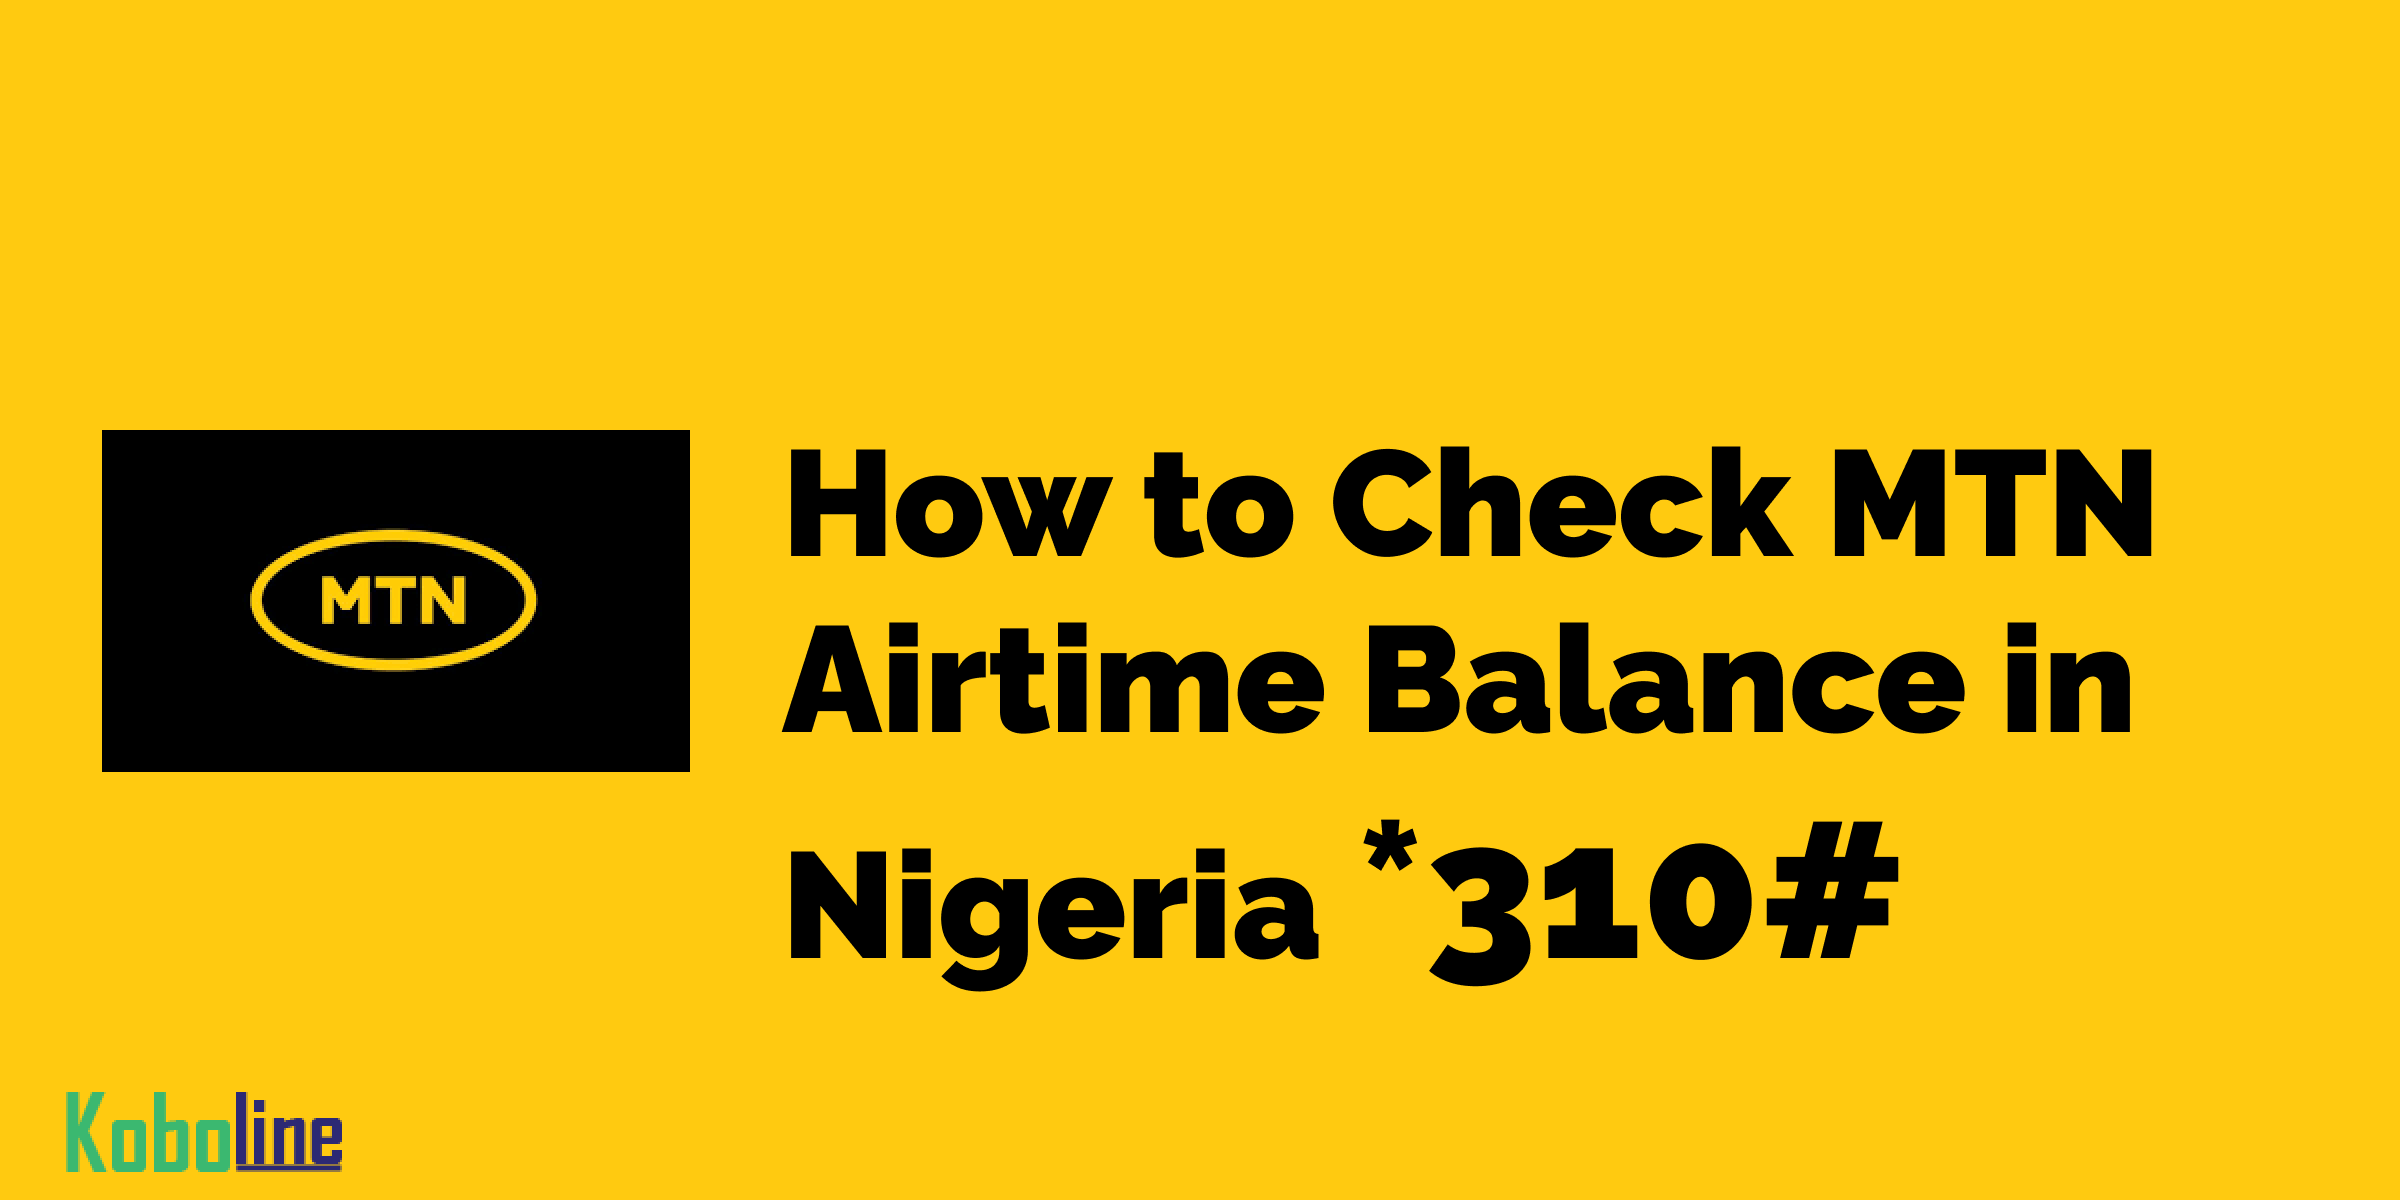 How to check mtn airtime balance in nigeria